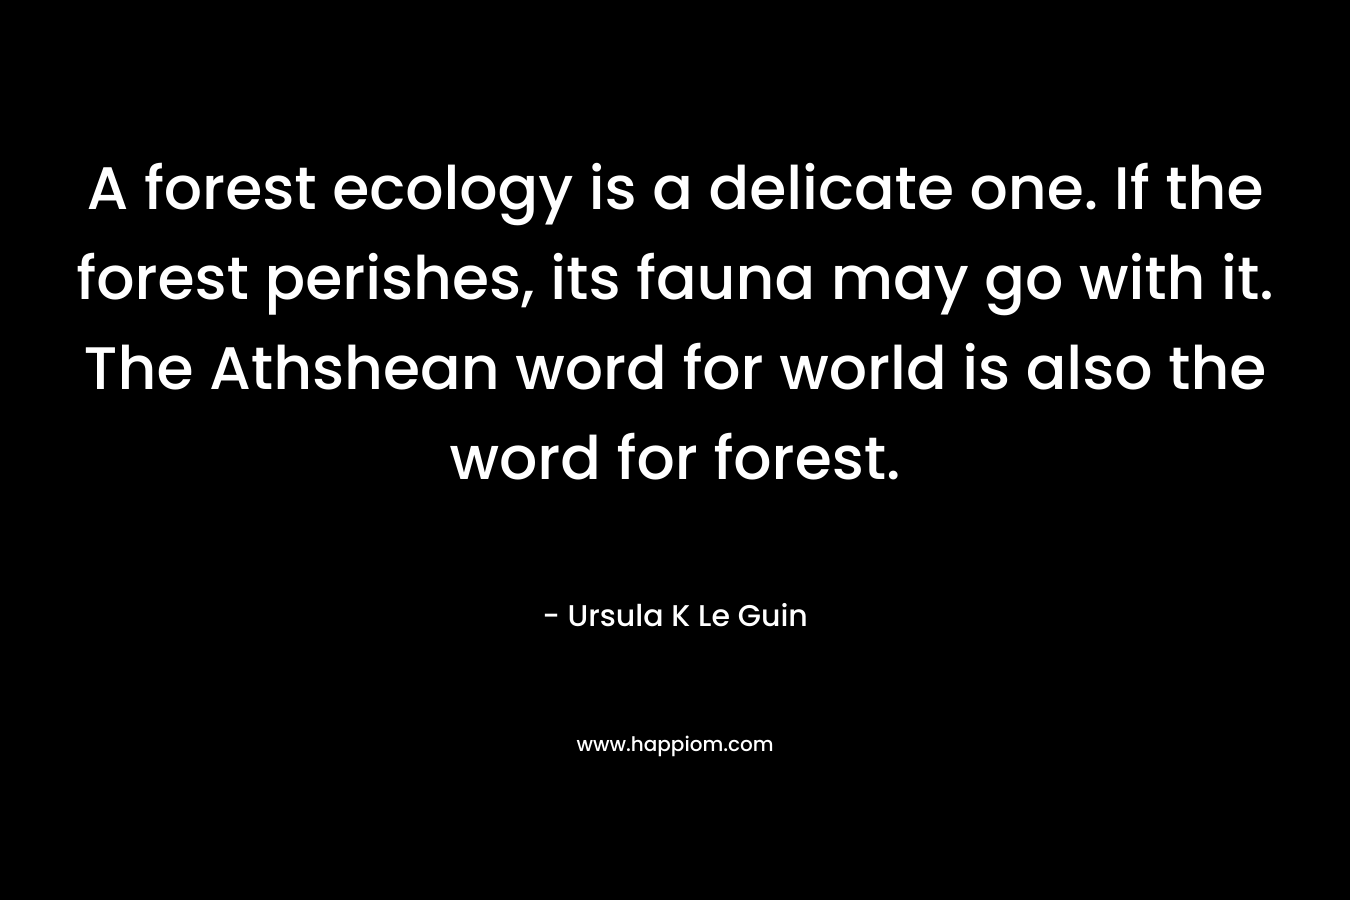 A forest ecology is a delicate one. If the forest perishes, its fauna may go with it. The Athshean word for world is also the word for forest.